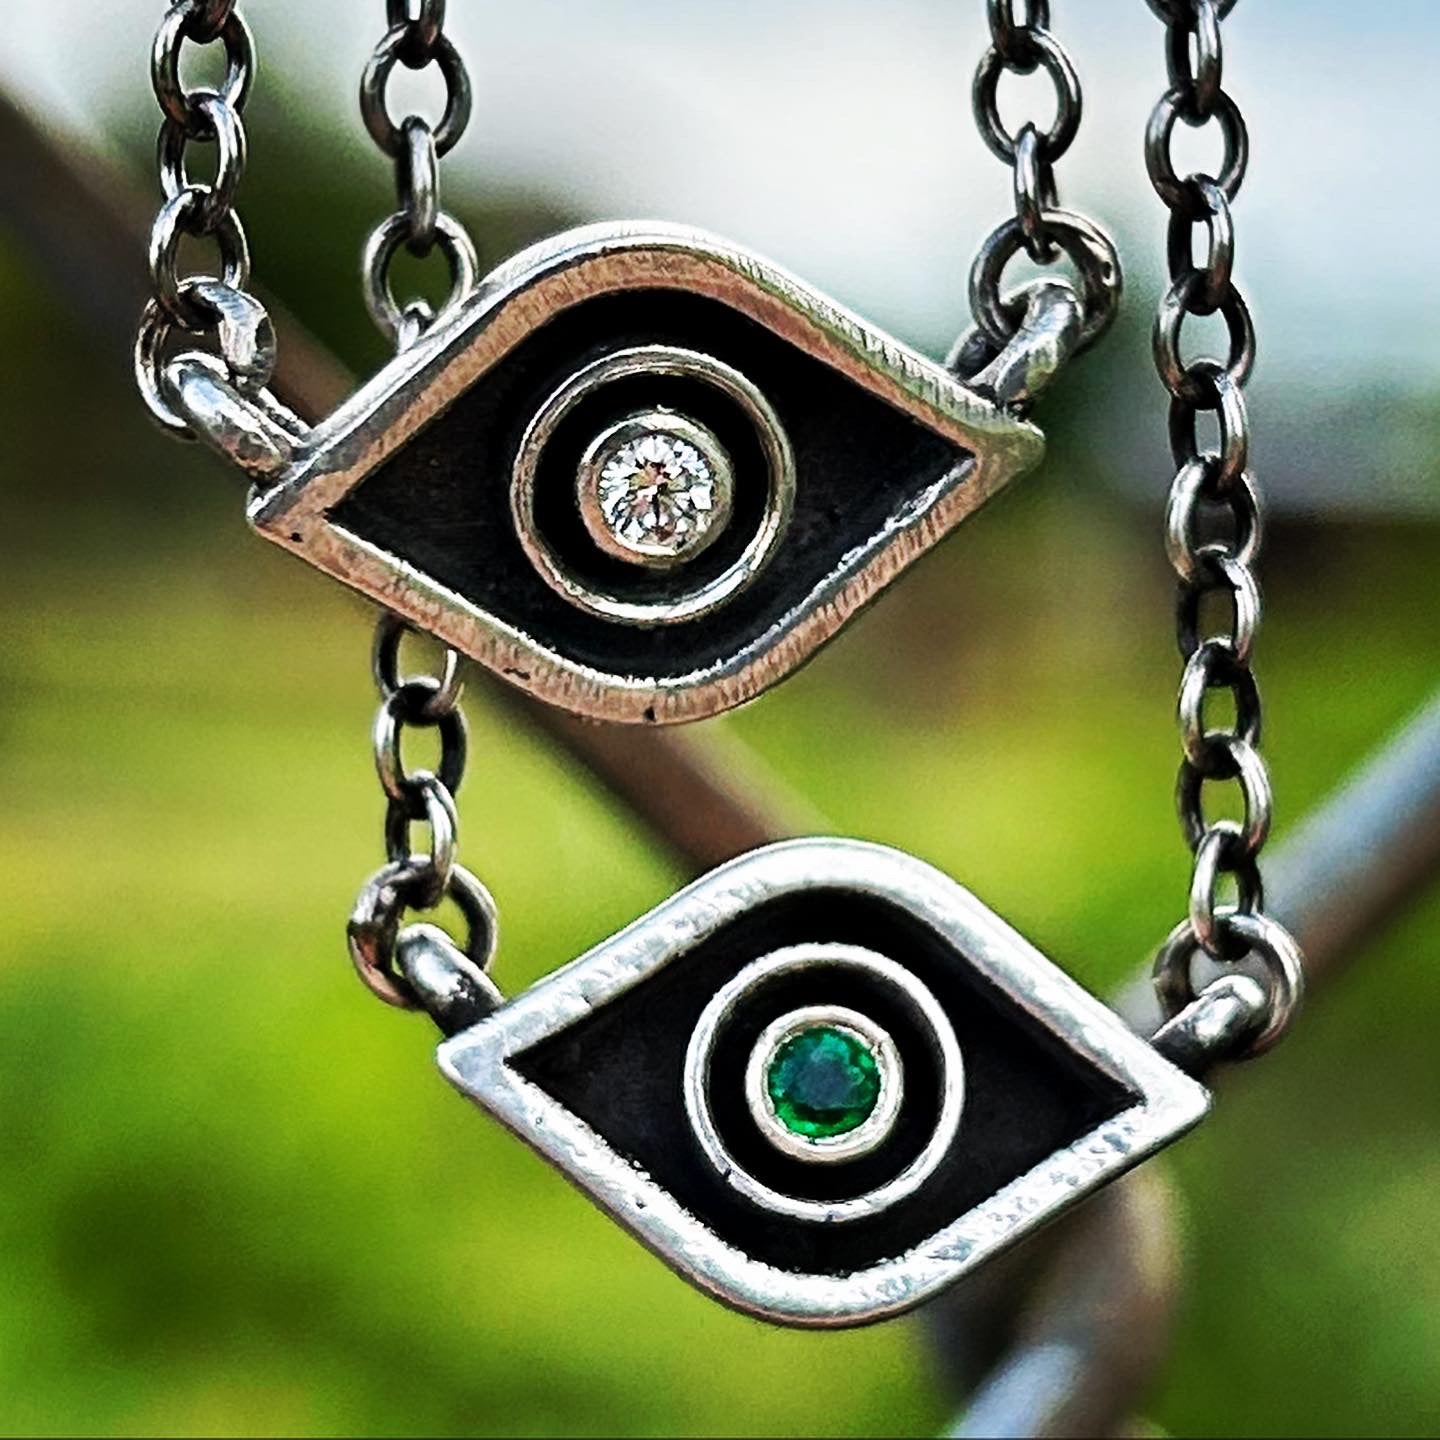 Emerald Eye on You Necklace